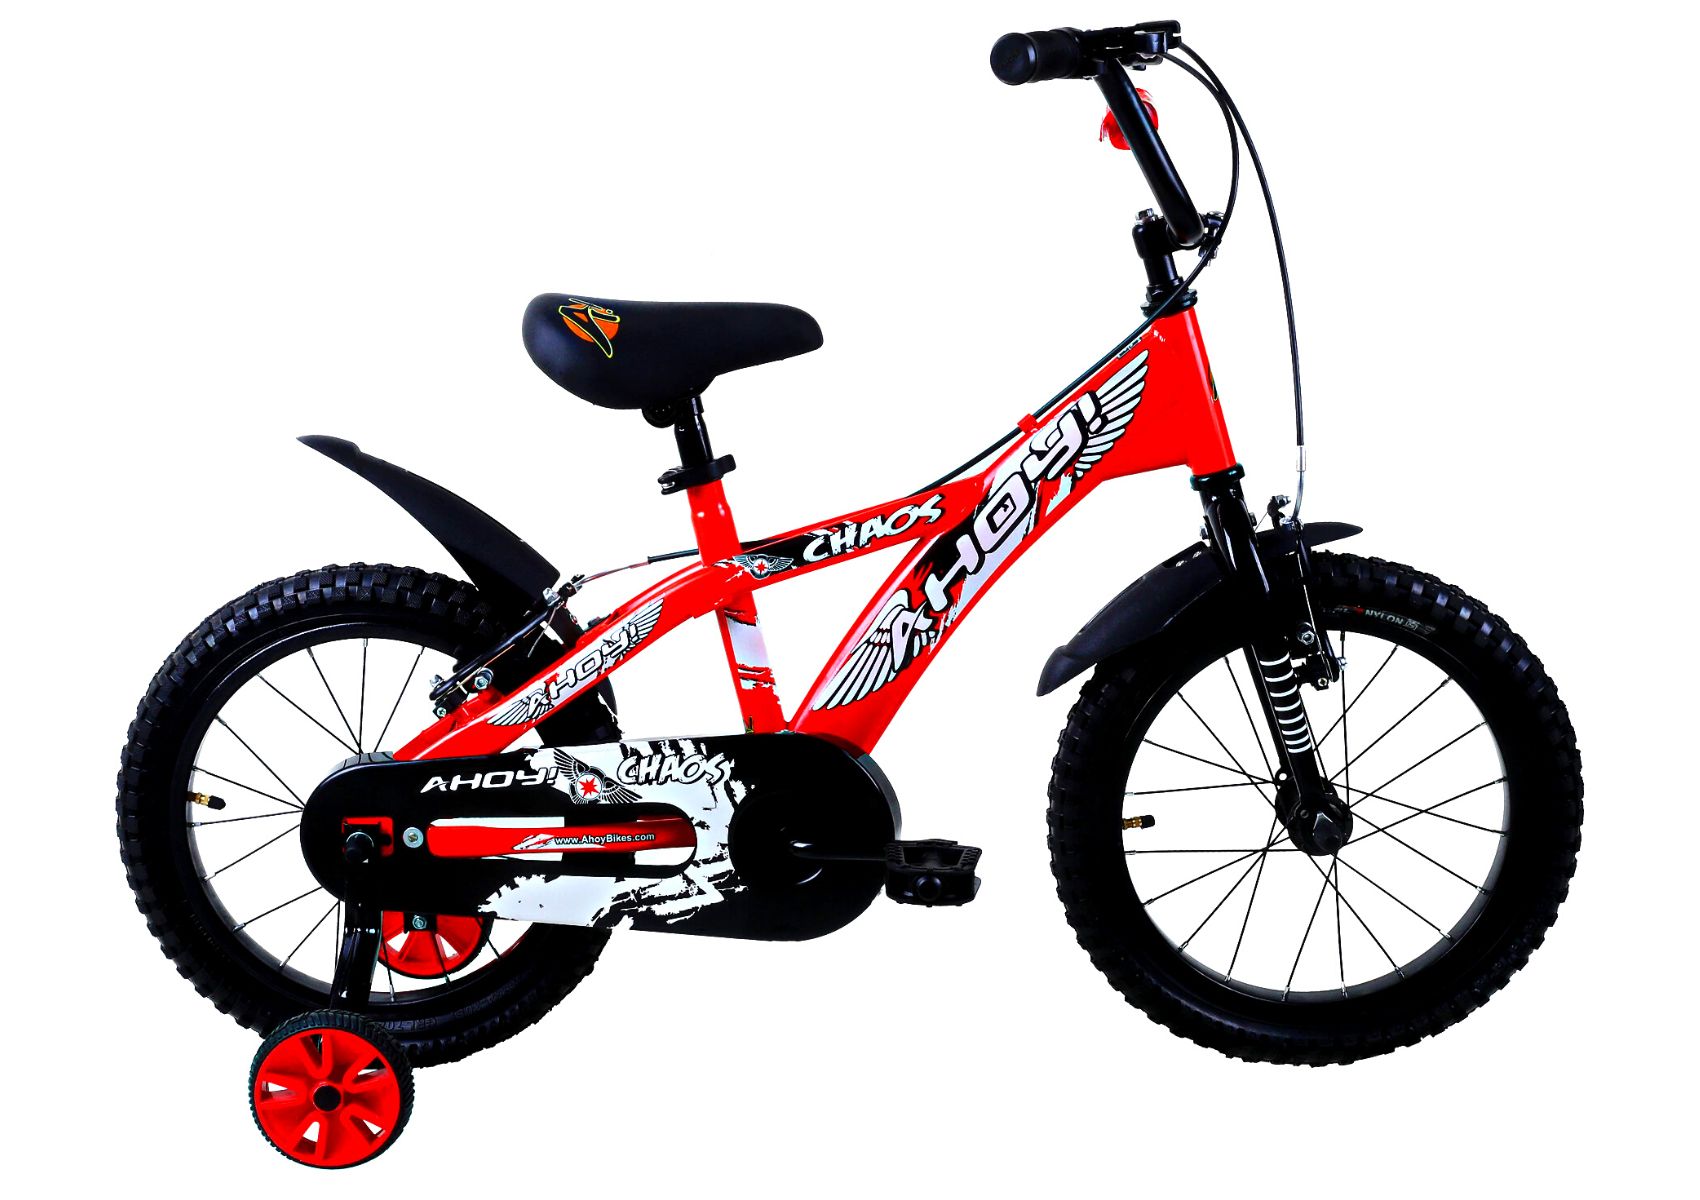 Chaos Junior Bike Single Speed 20T | Buy Red Cycle Non Gear for Kids